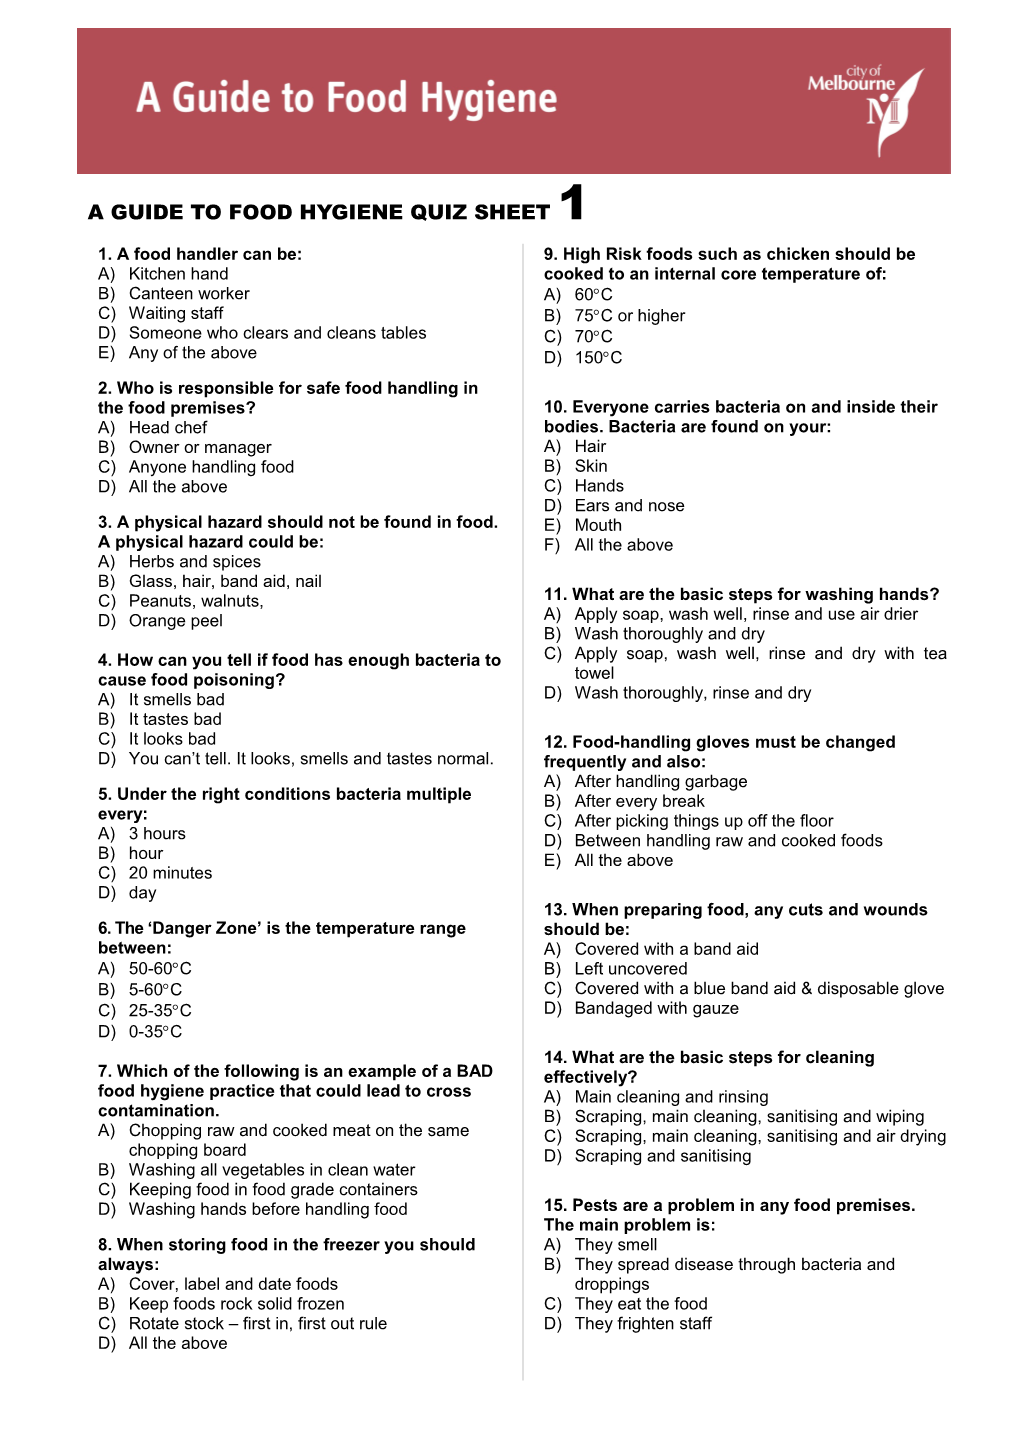 A Guide to Food Hygiene Quiz Sheet 1